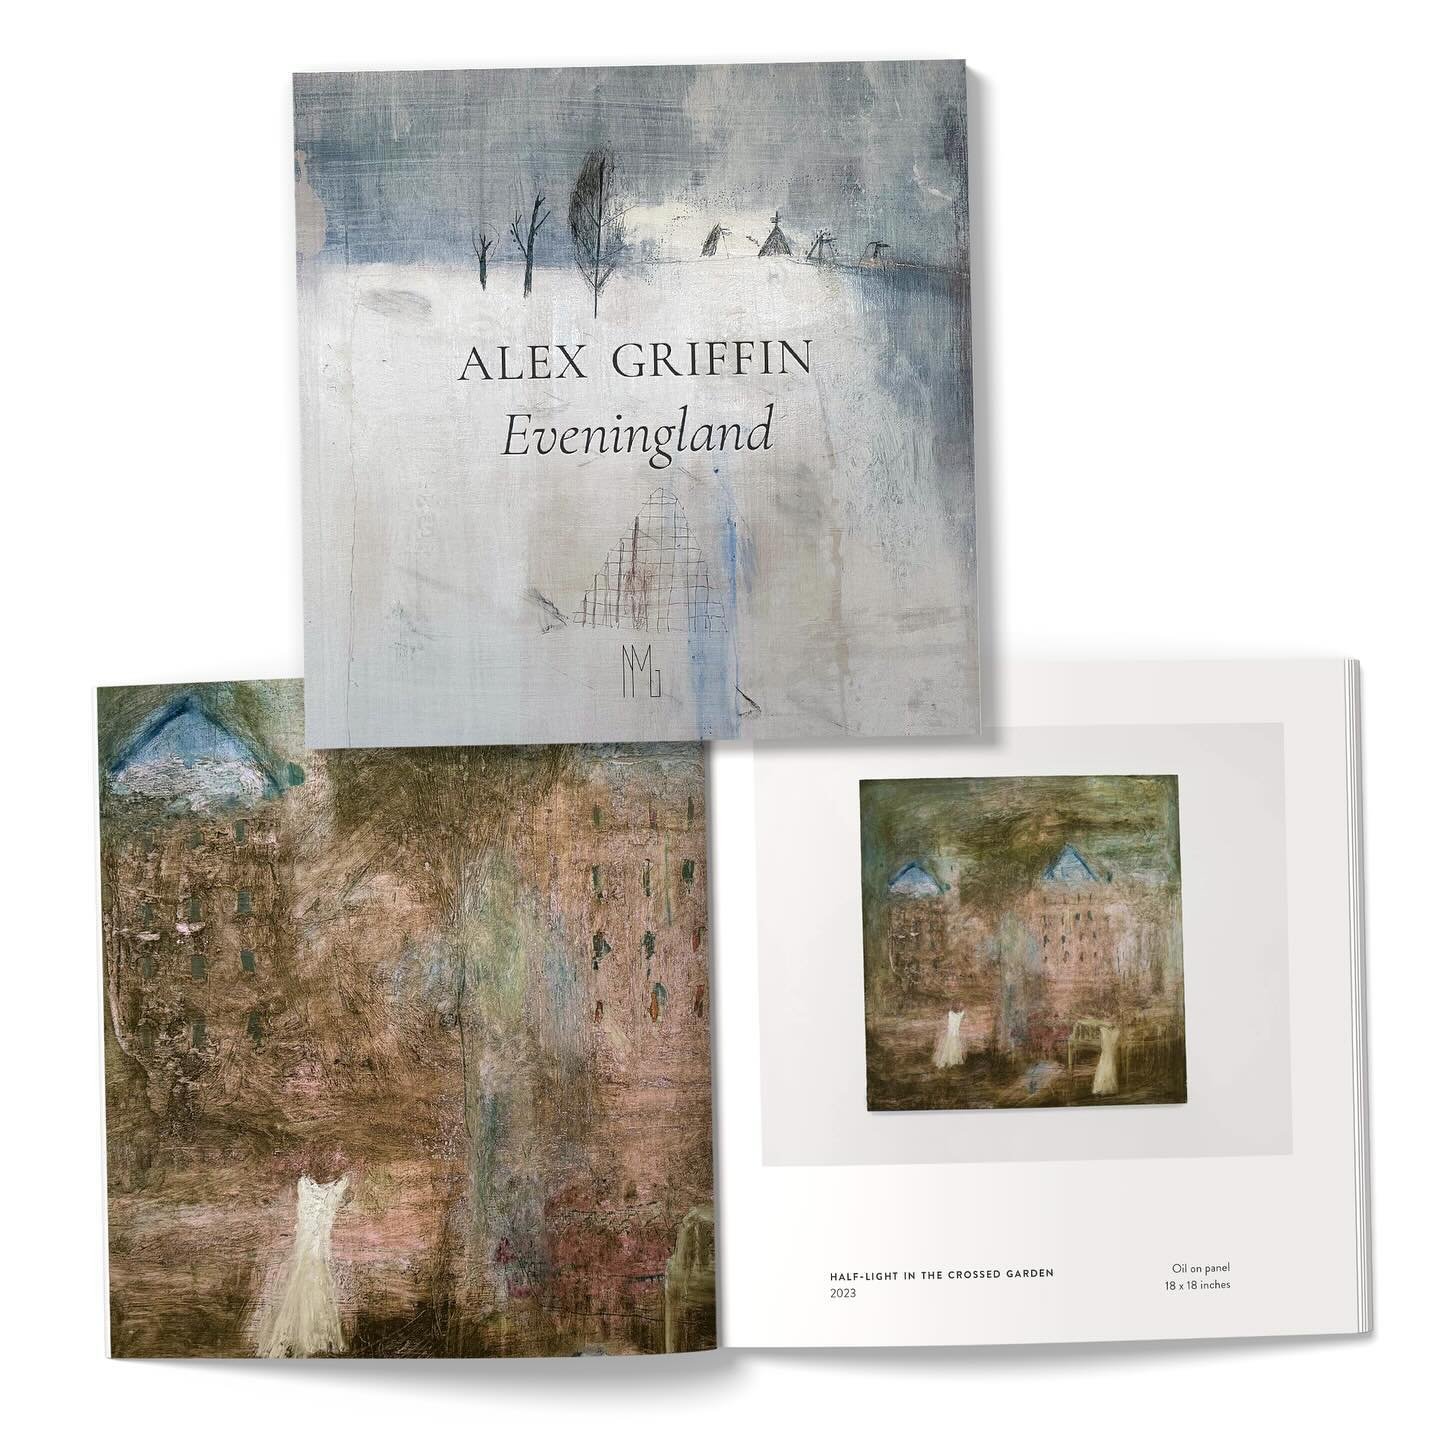 The limited edition catalog that accompanies Alex Griffin&rsquo;s solo exhibition &ldquo;Eveningland&rdquo; is now available in our Shop! Click the link in our bio to purchase a copy. 

&ldquo;Eveningland&rdquo; is on view through May 31st in Nancy M